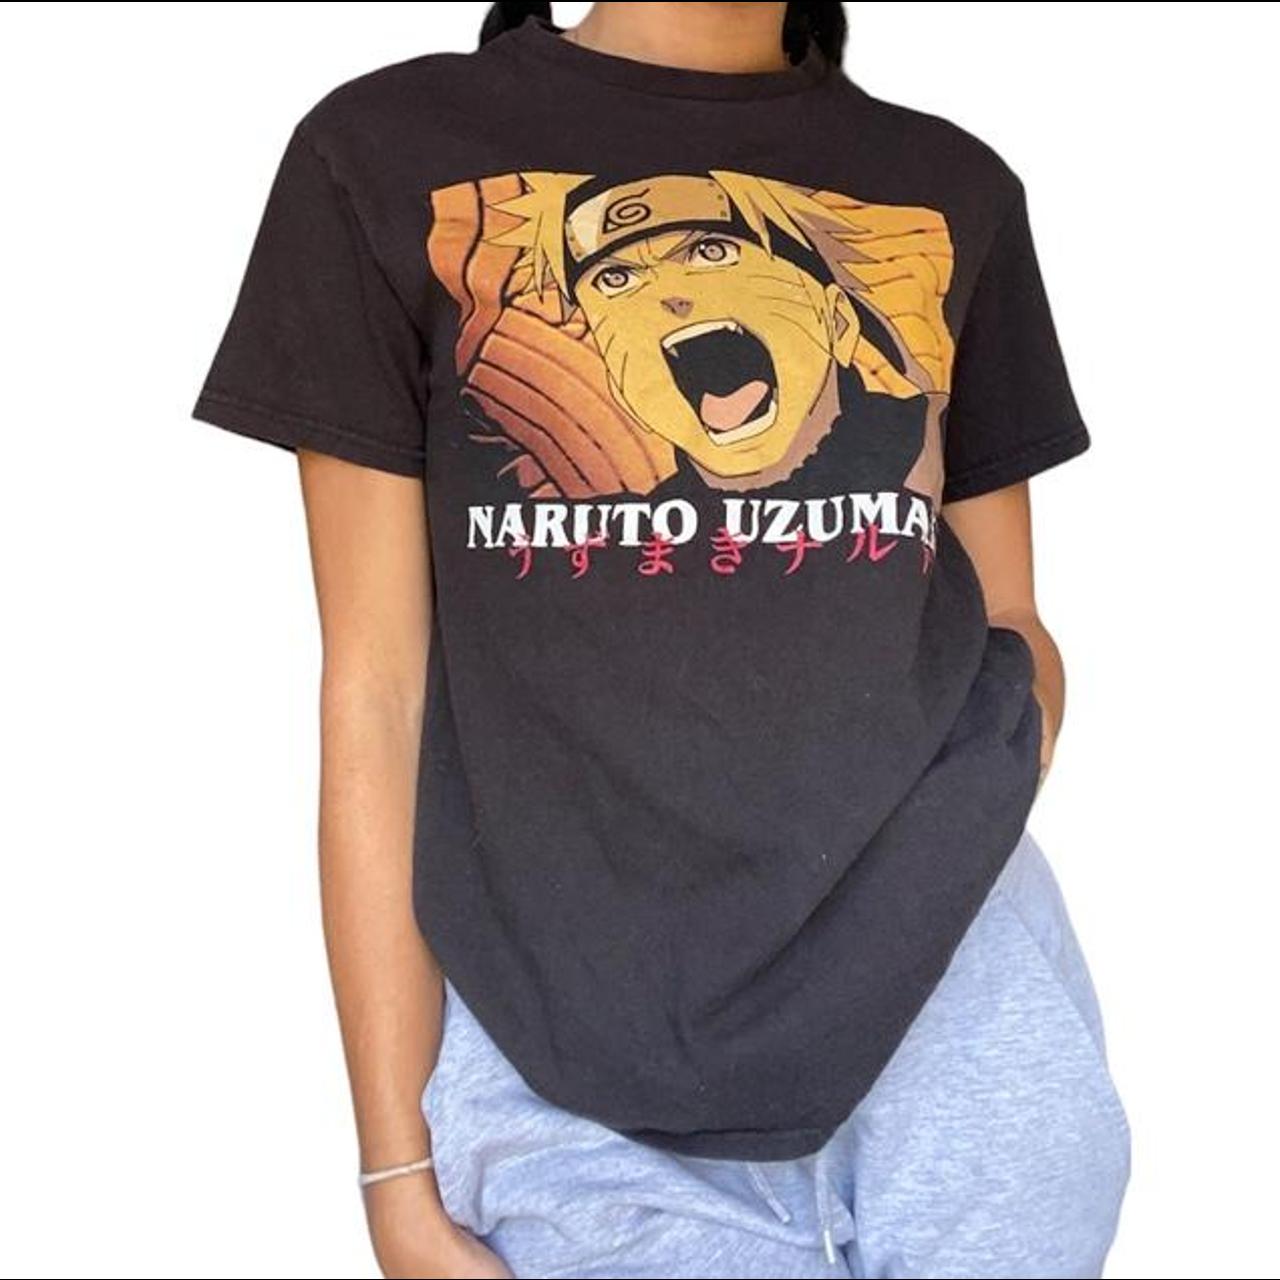 Product Image 1 - NARUTO T SHIRT 🖤💛

•good condition
•super